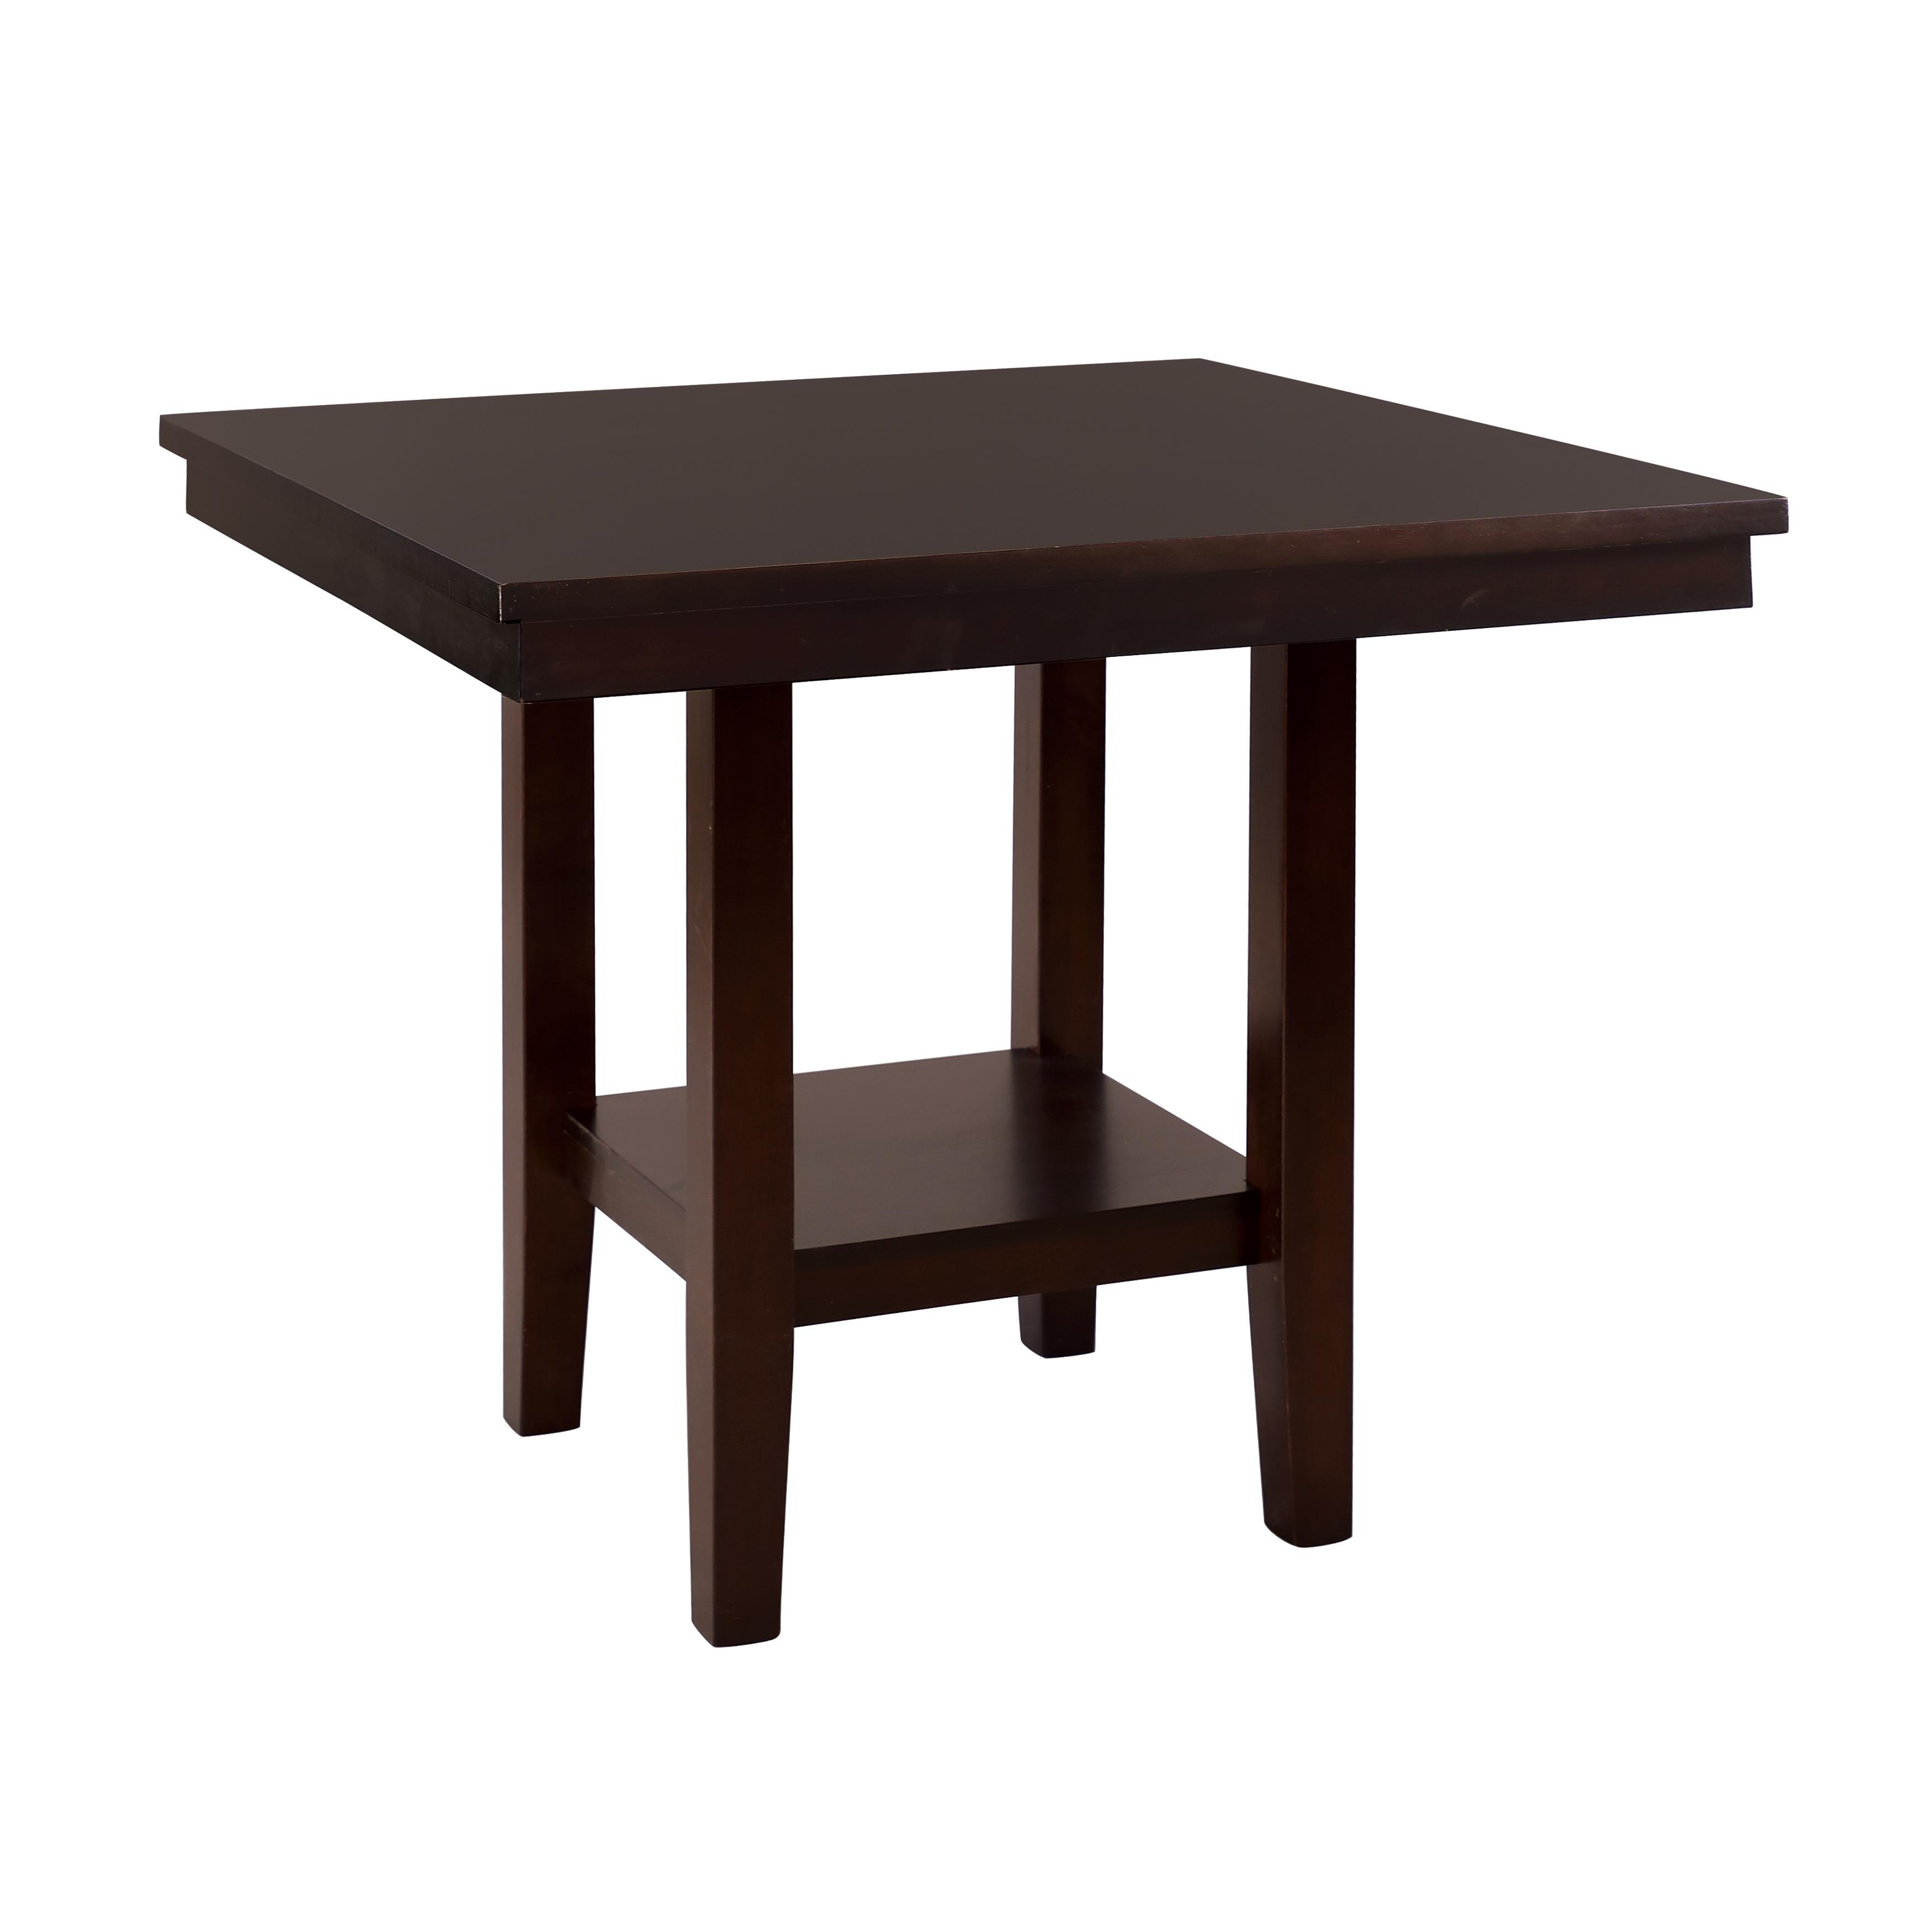 Casual Counter Height Table 5460-36 Diego 5460-36 in Espresso 